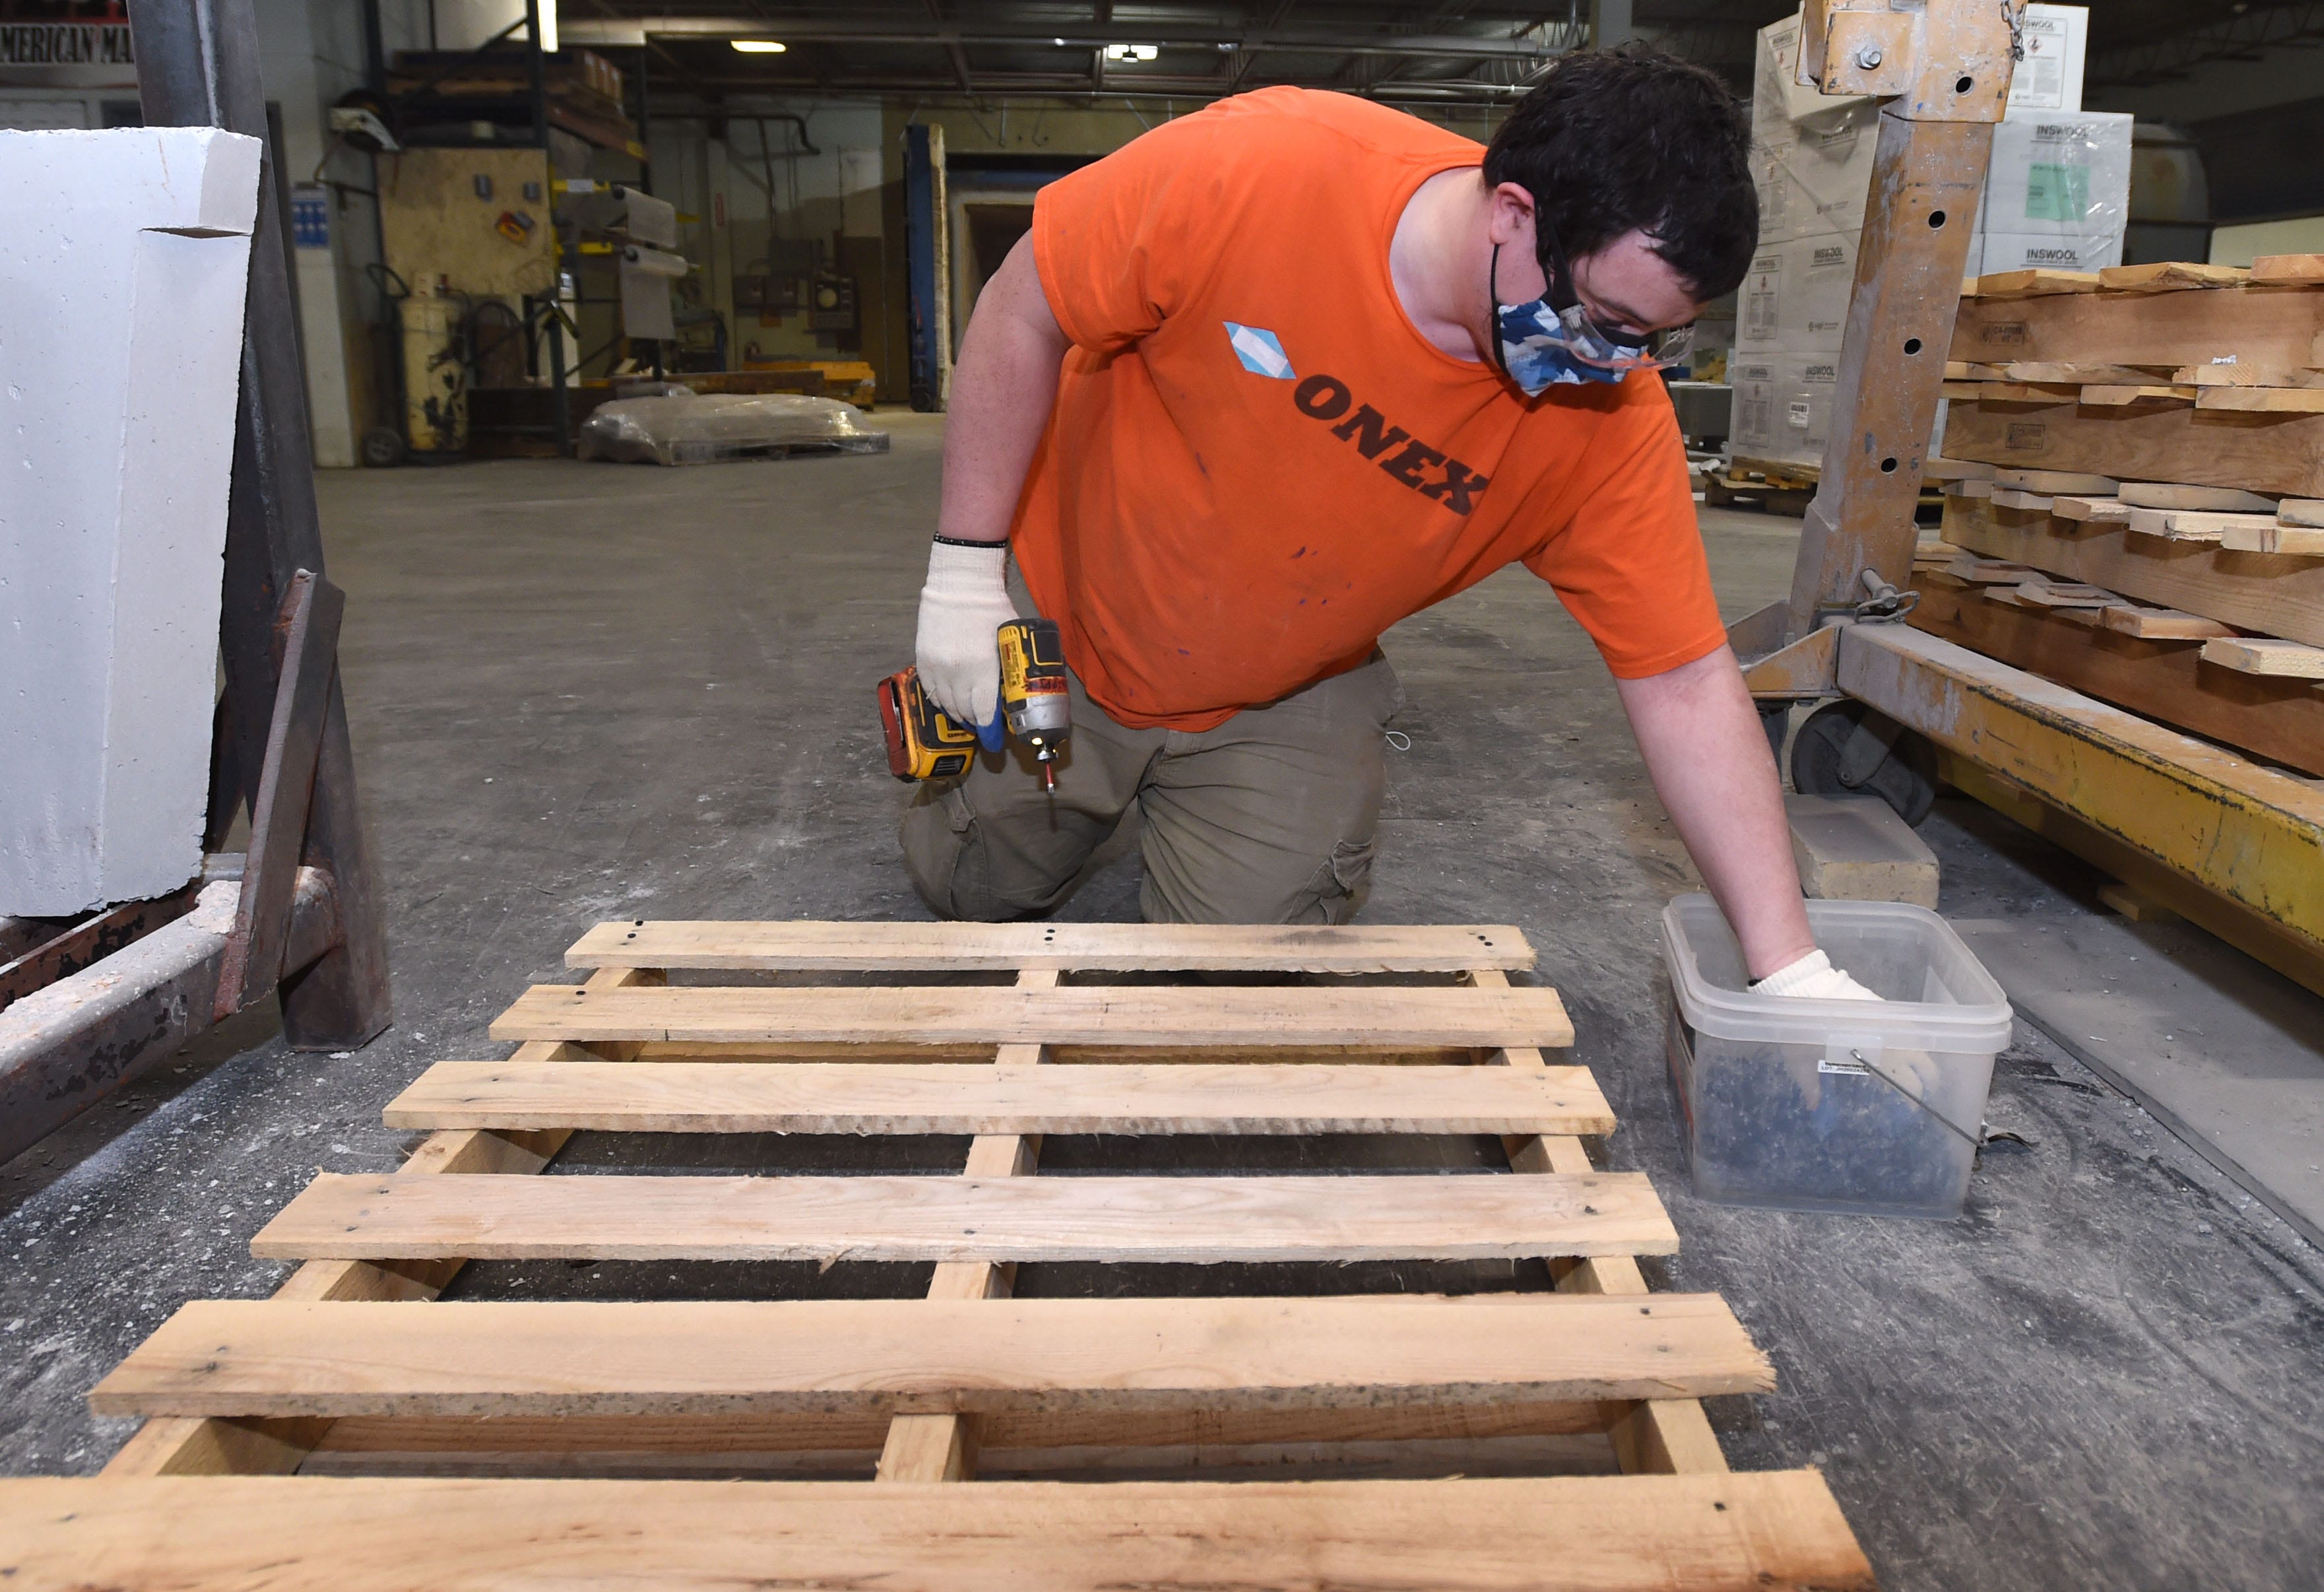 James Minier, a pre-cast specialist at Onex, assembles pallets March 12 at the Erie company. Minier, a client of the Barber National Institute, works part-time at Onex performing a variety of jobs.